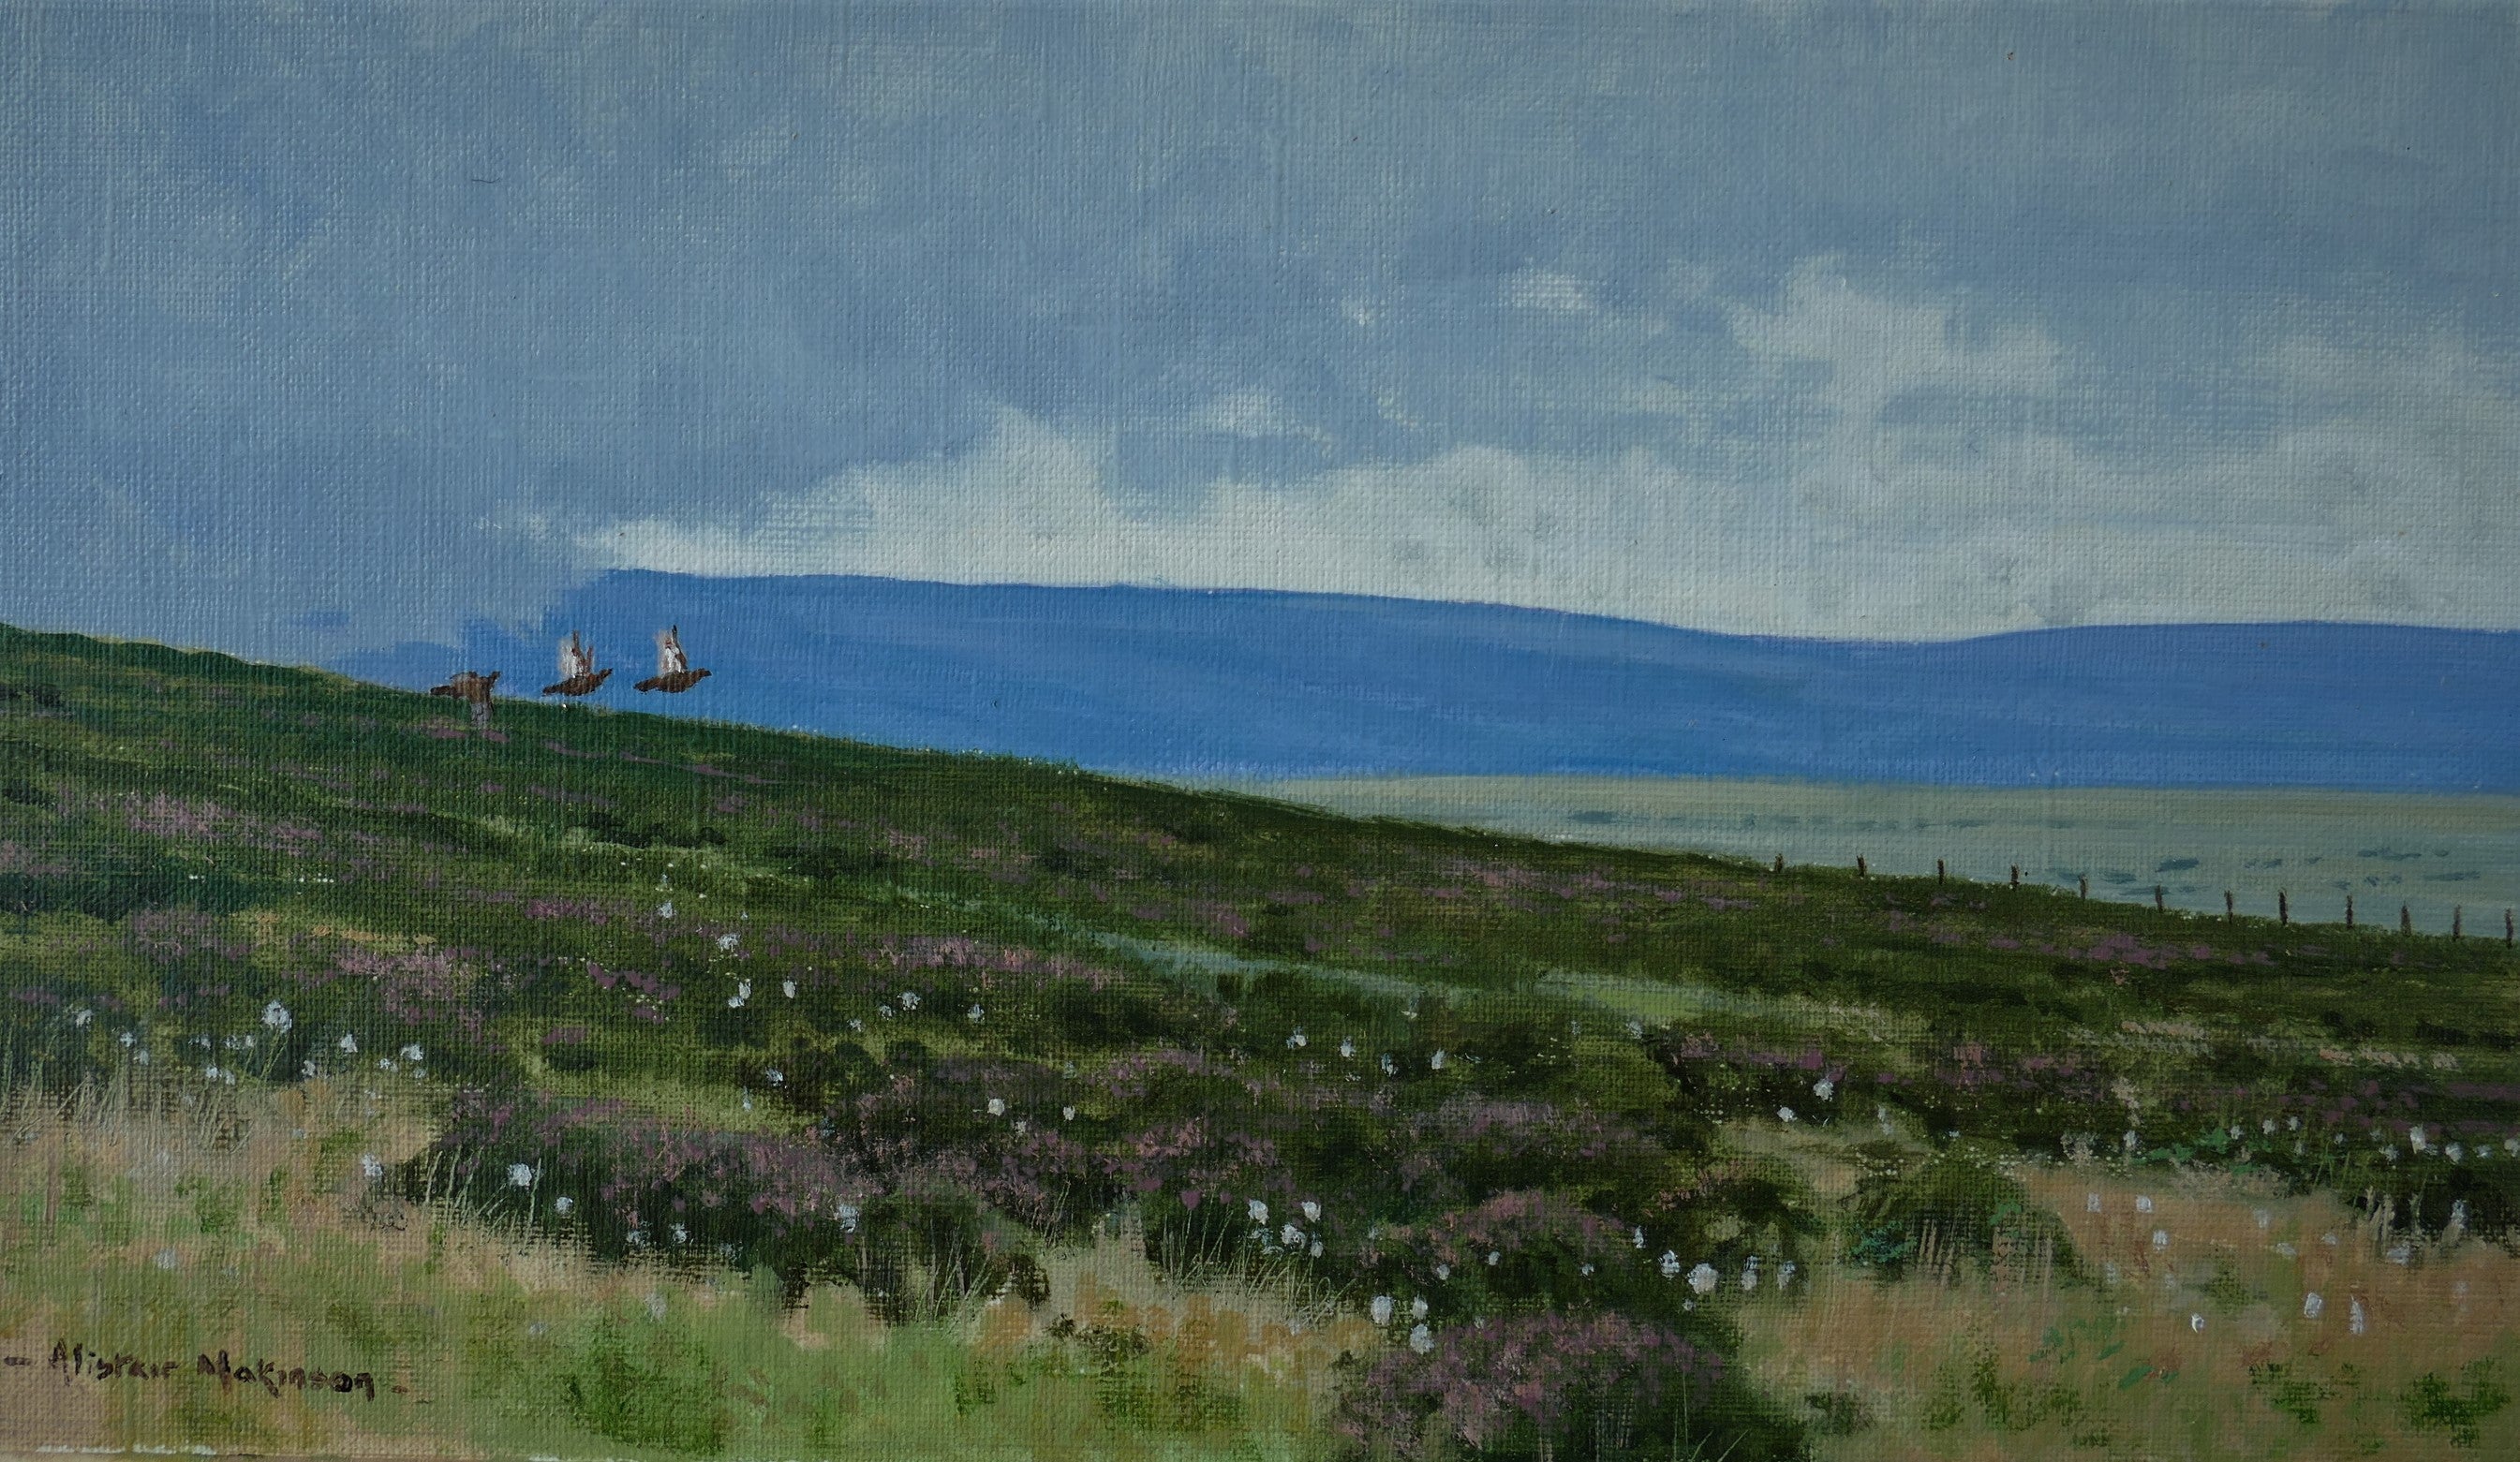 'Approaching Shower' - Original Oil Painting by Alistair Makinson - 15 x 26cm